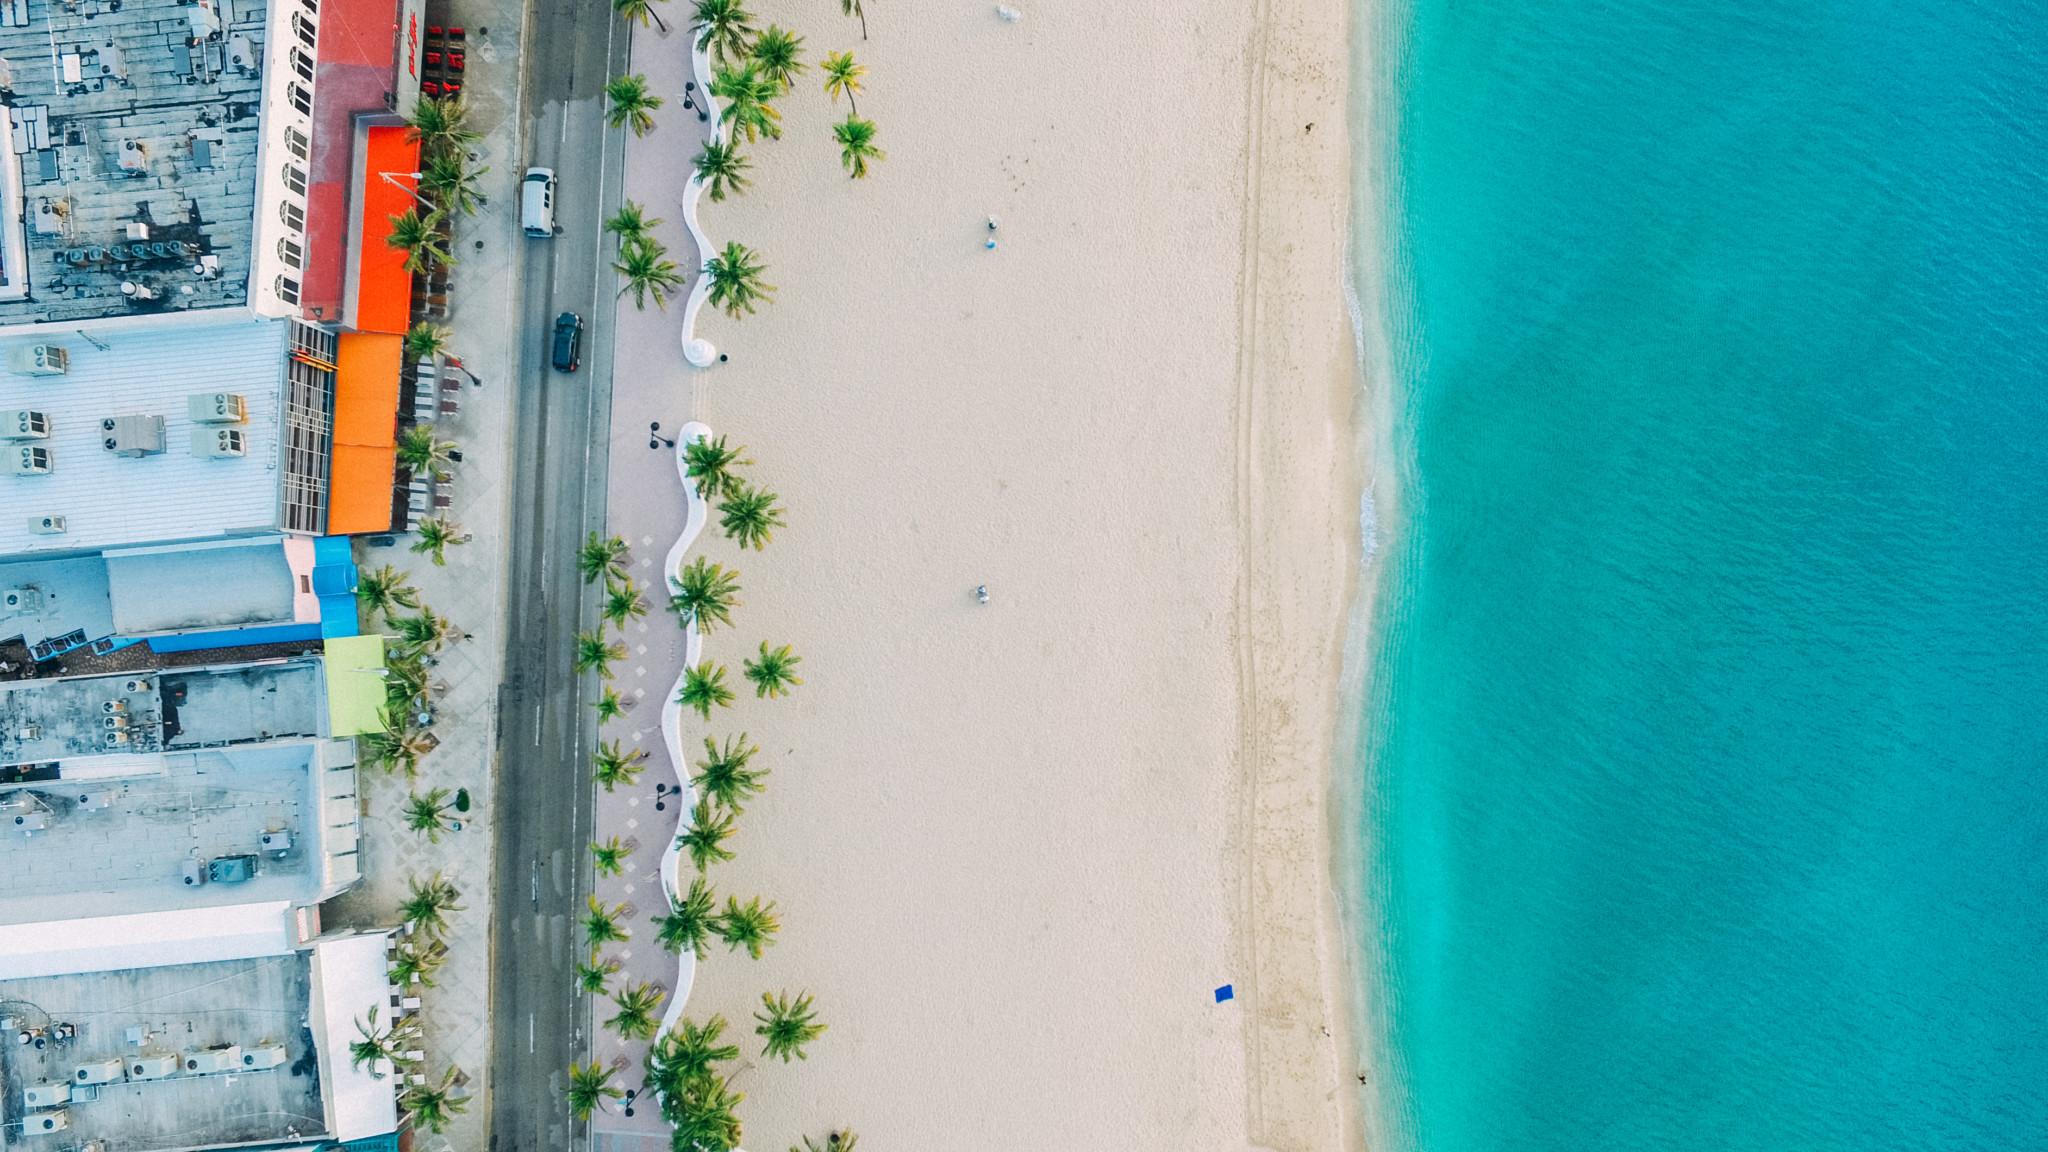 Beautiful Beach Drone Photo That Will Make a Great Wallpaper